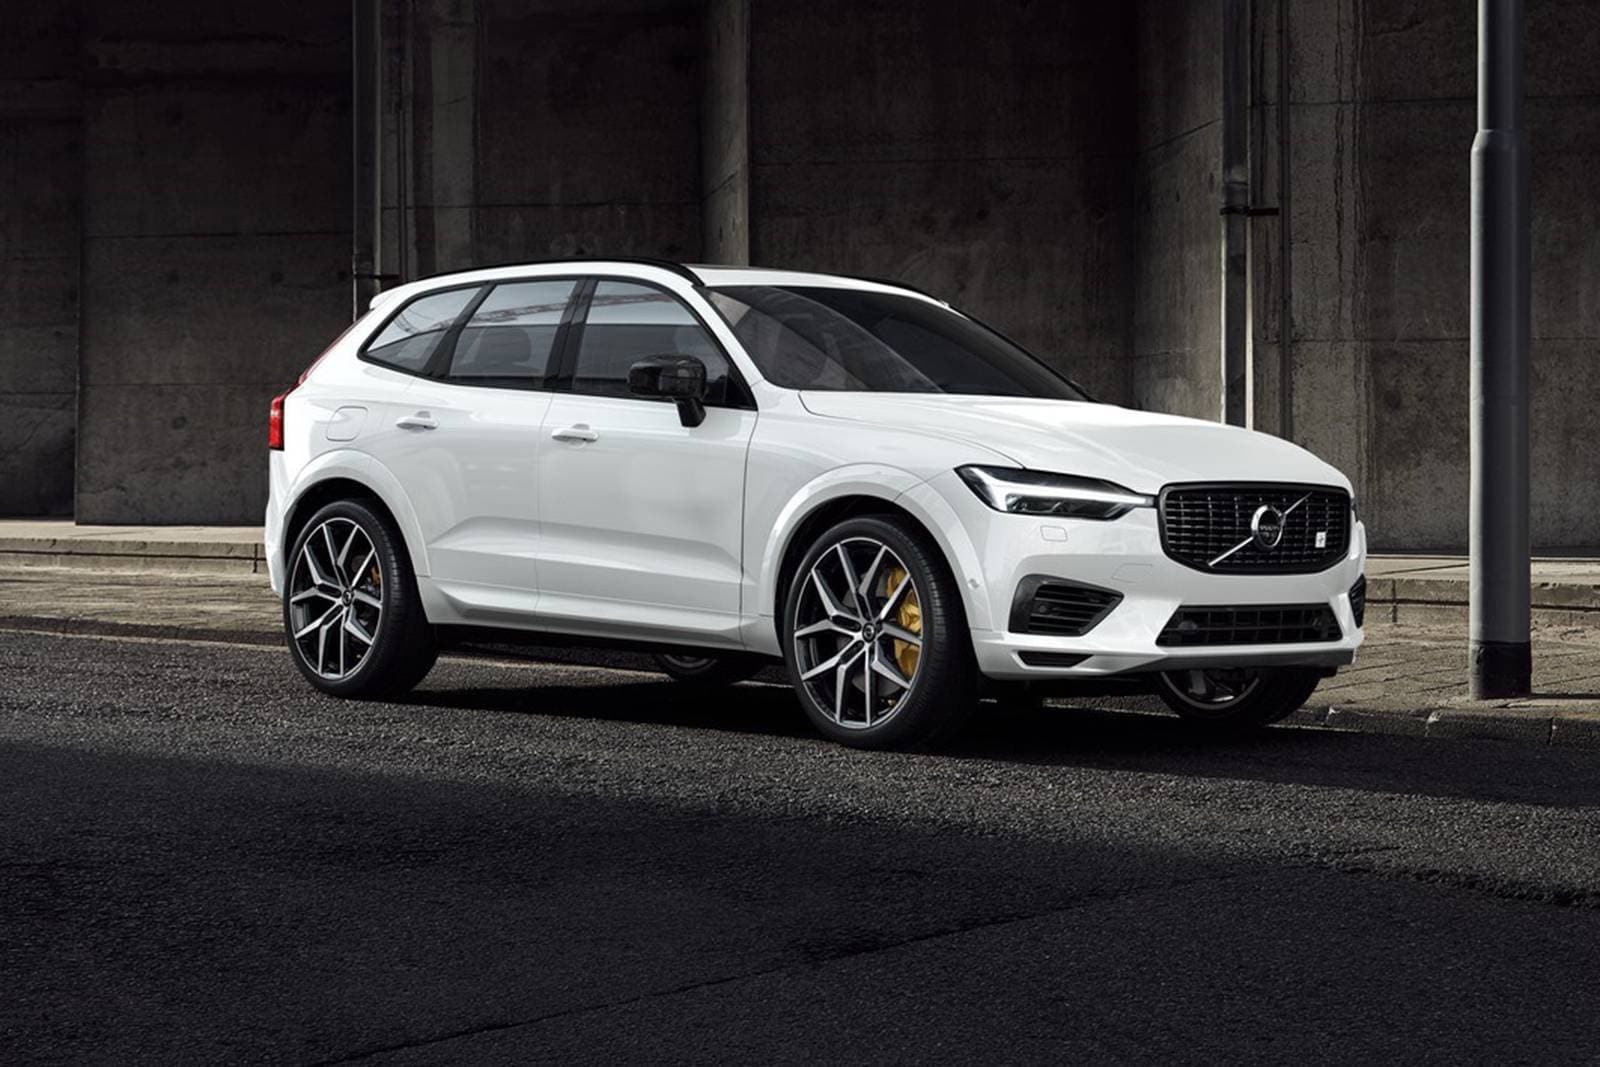 Used 2021 Volvo XC60 T8 Polestar Engineered Review | Edmunds